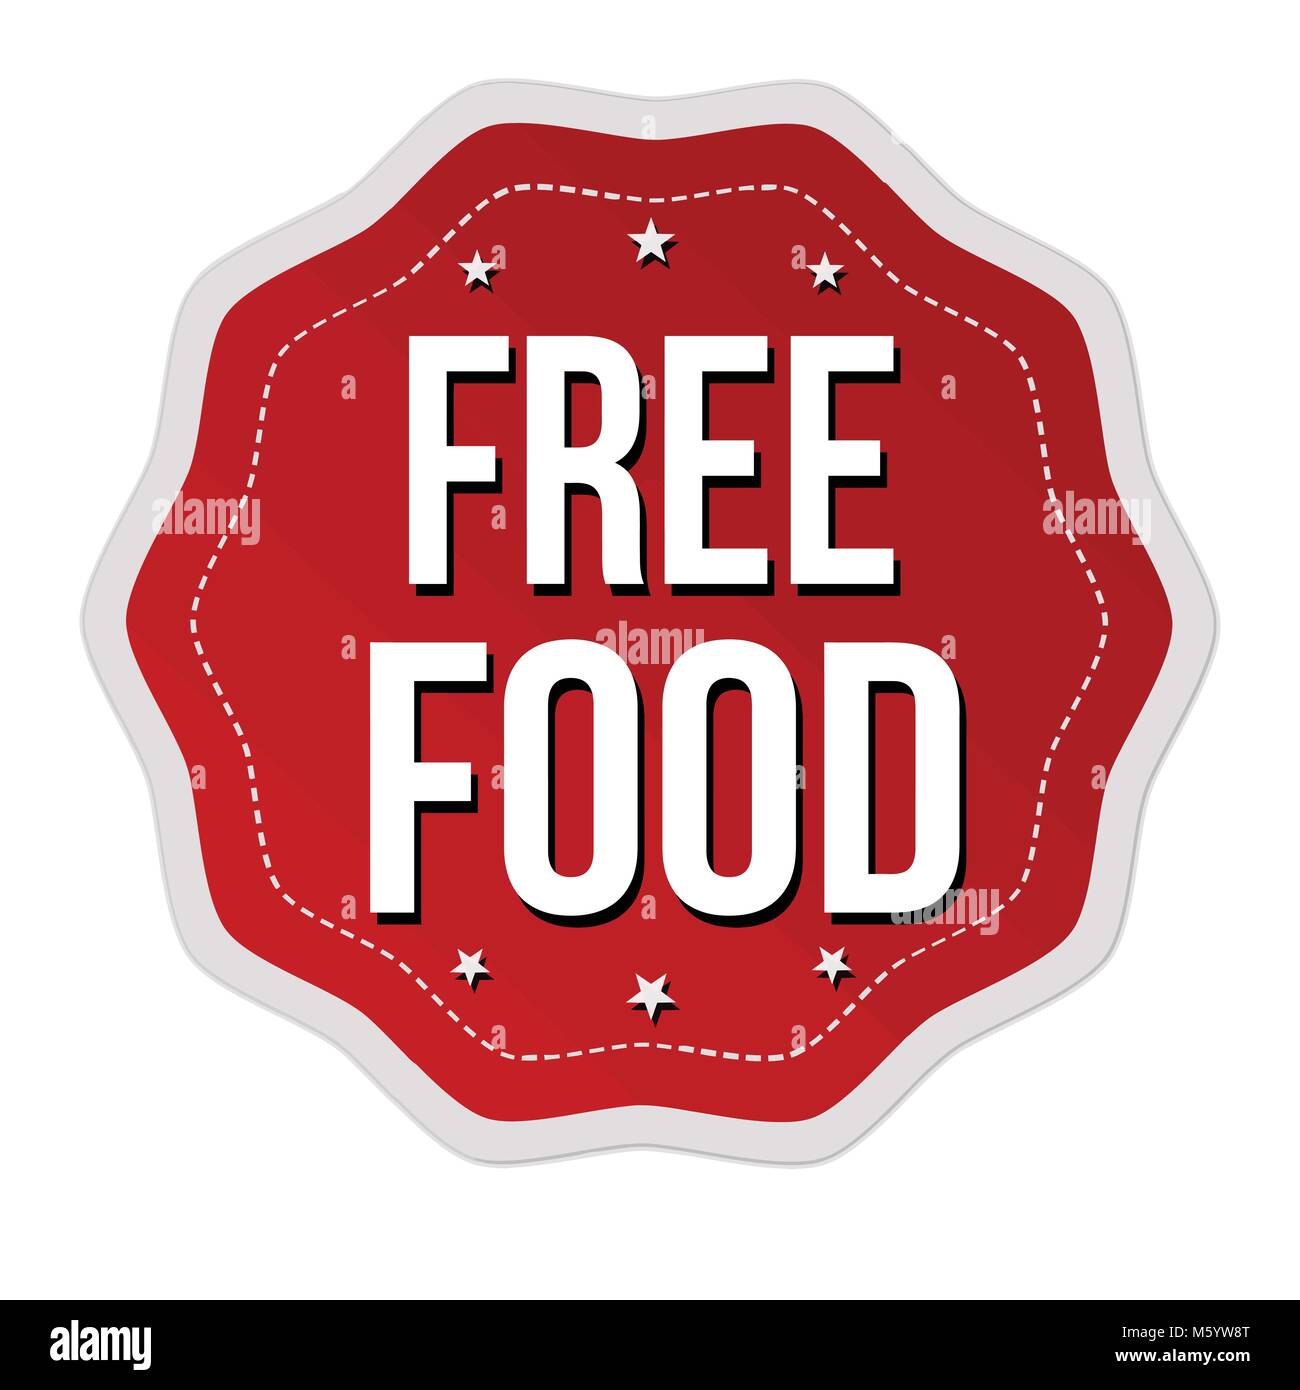 Free food label or sticker on white background, vector illustration Stock Vector